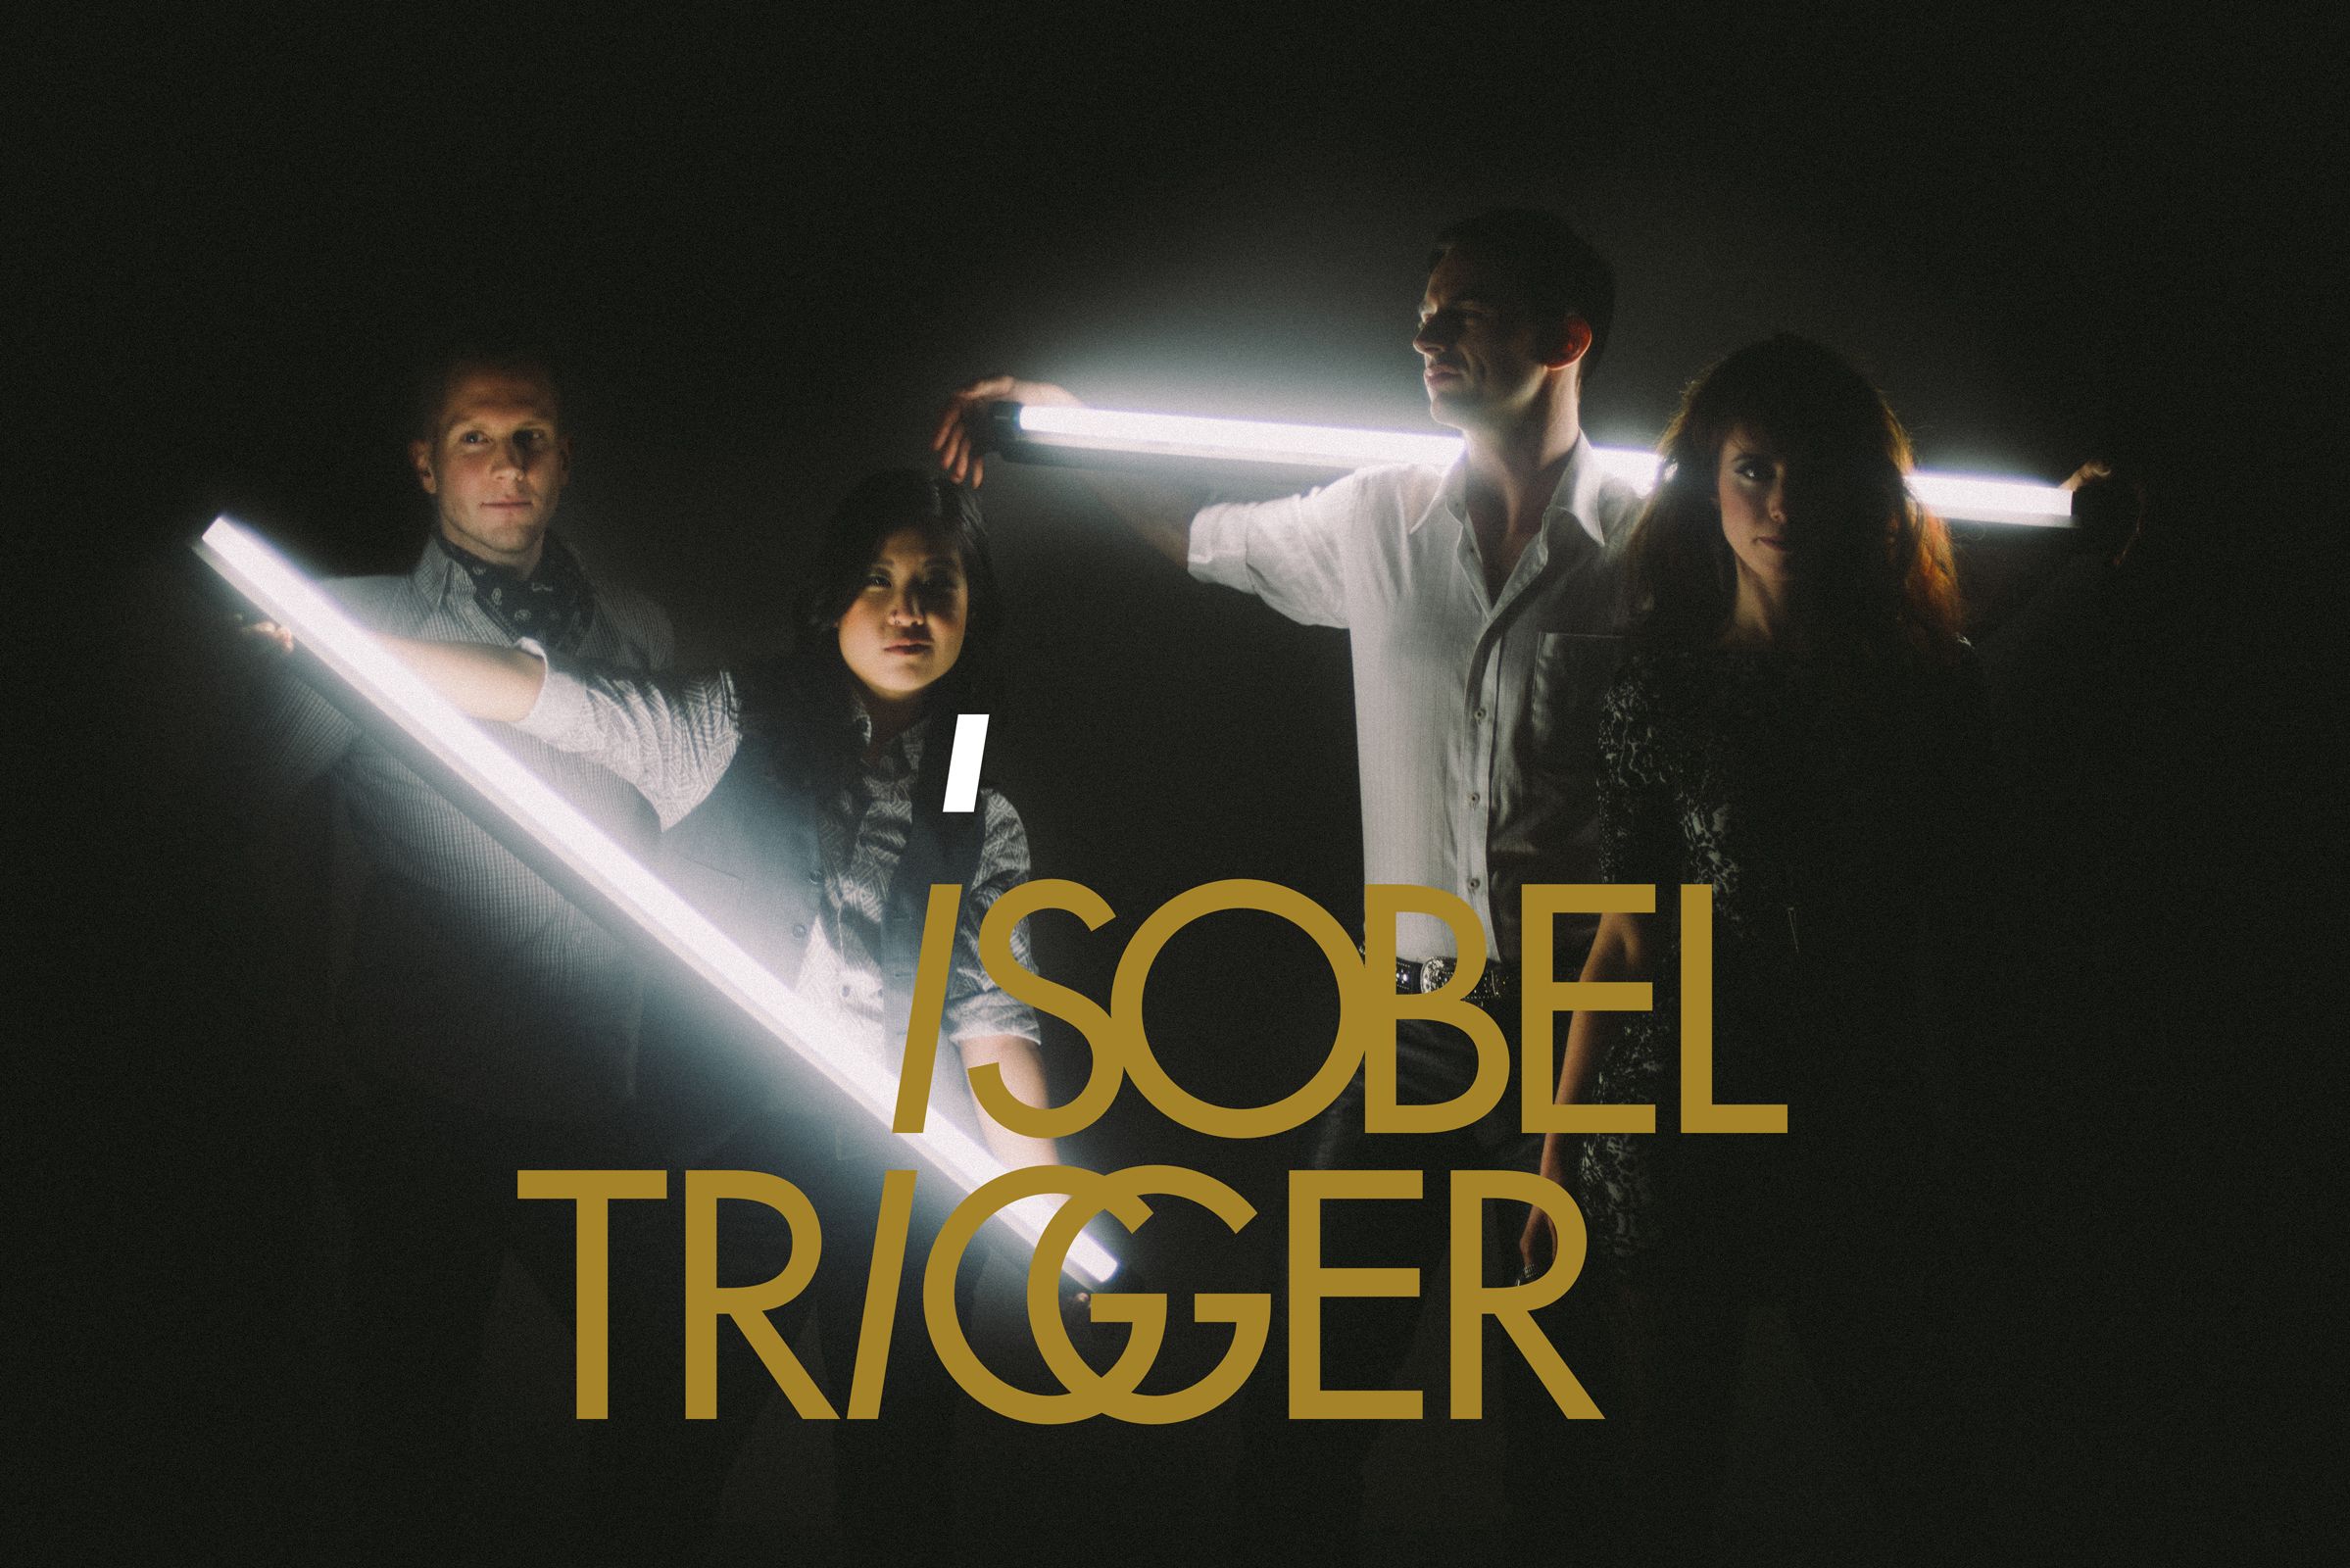 Band Photo for Isobel Trigger, a Canadian Rock Band